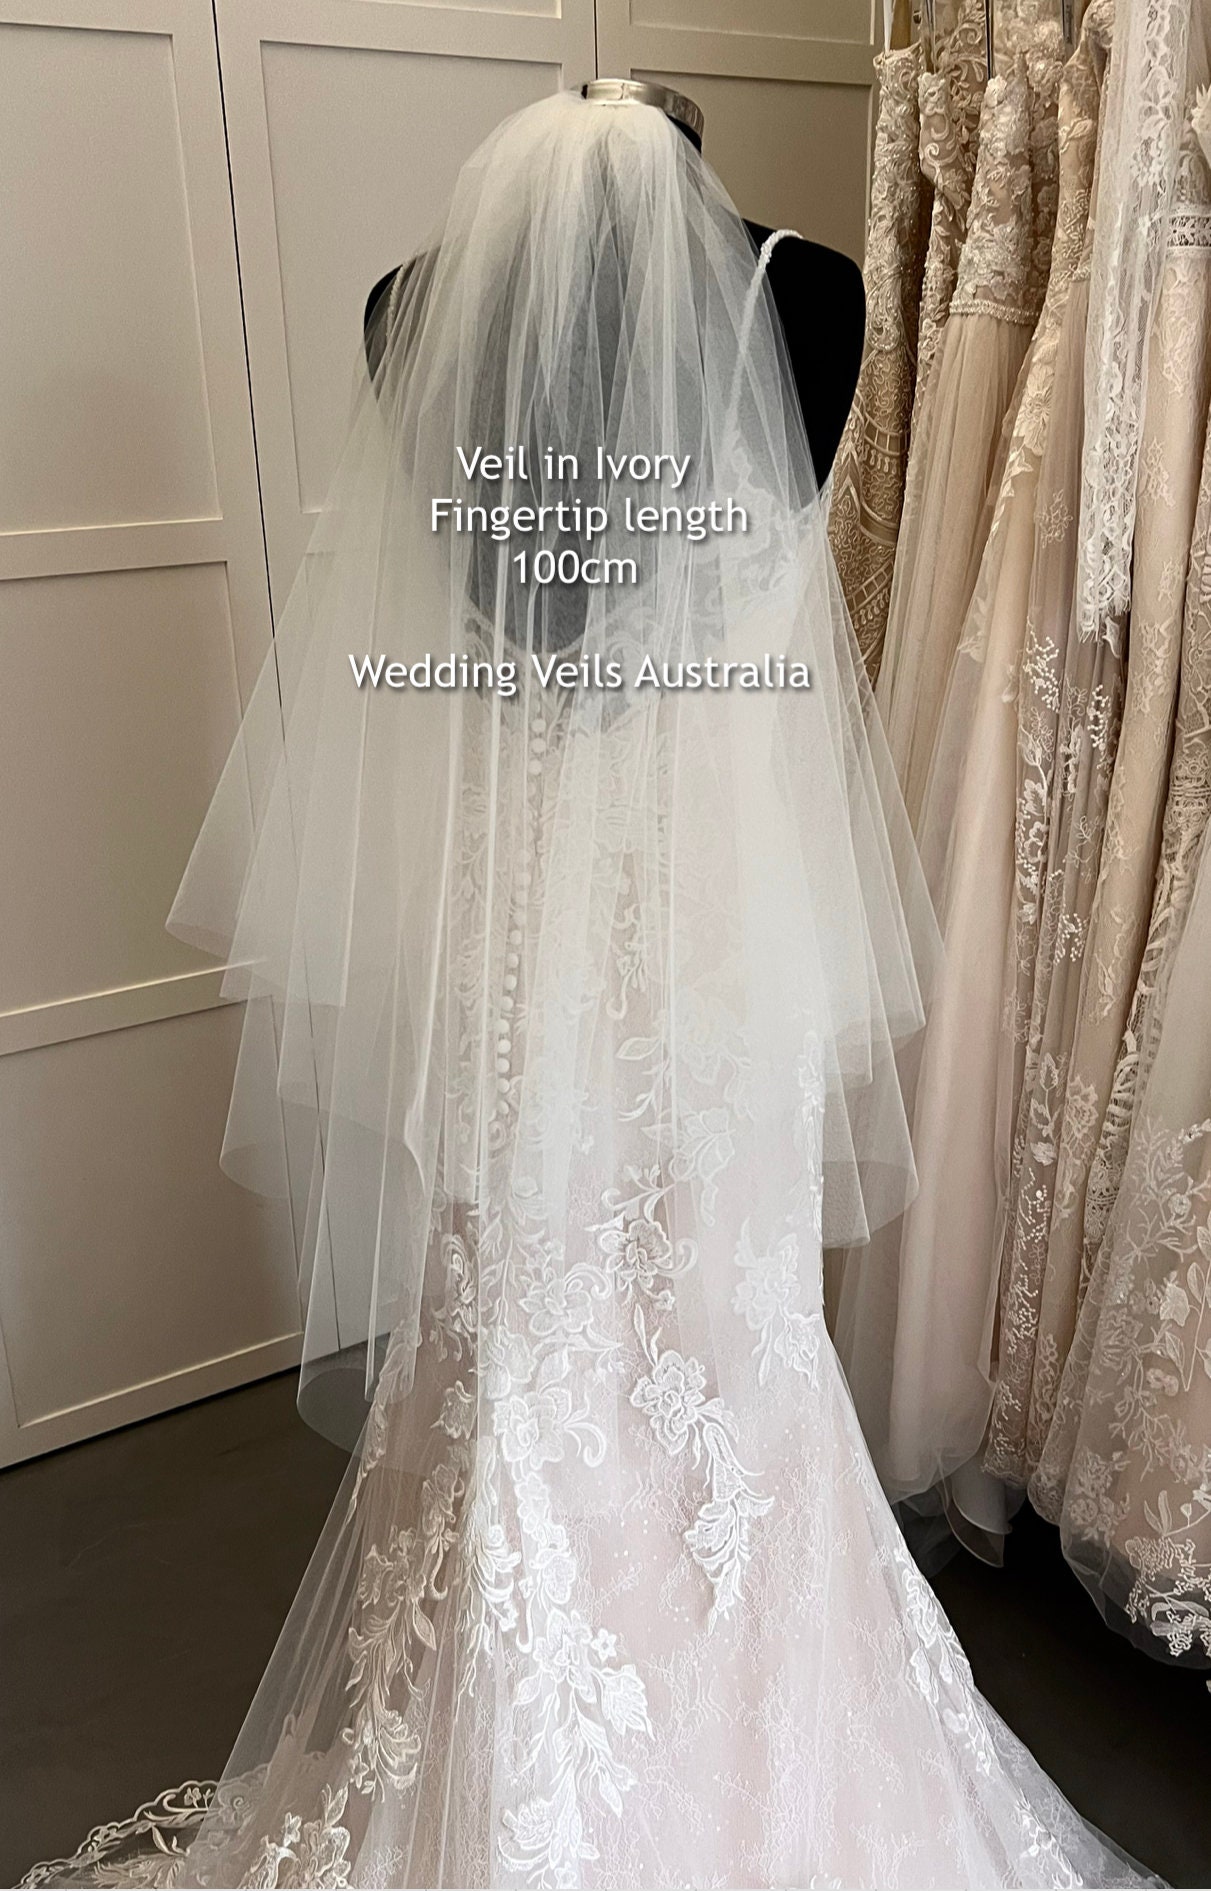 Two Tier Wedding Veils Many Lengths Waist Fingertip Elbow and More Circular  Cut Ivory Off-white White READY TO SHIP in 1-3 Business Days 